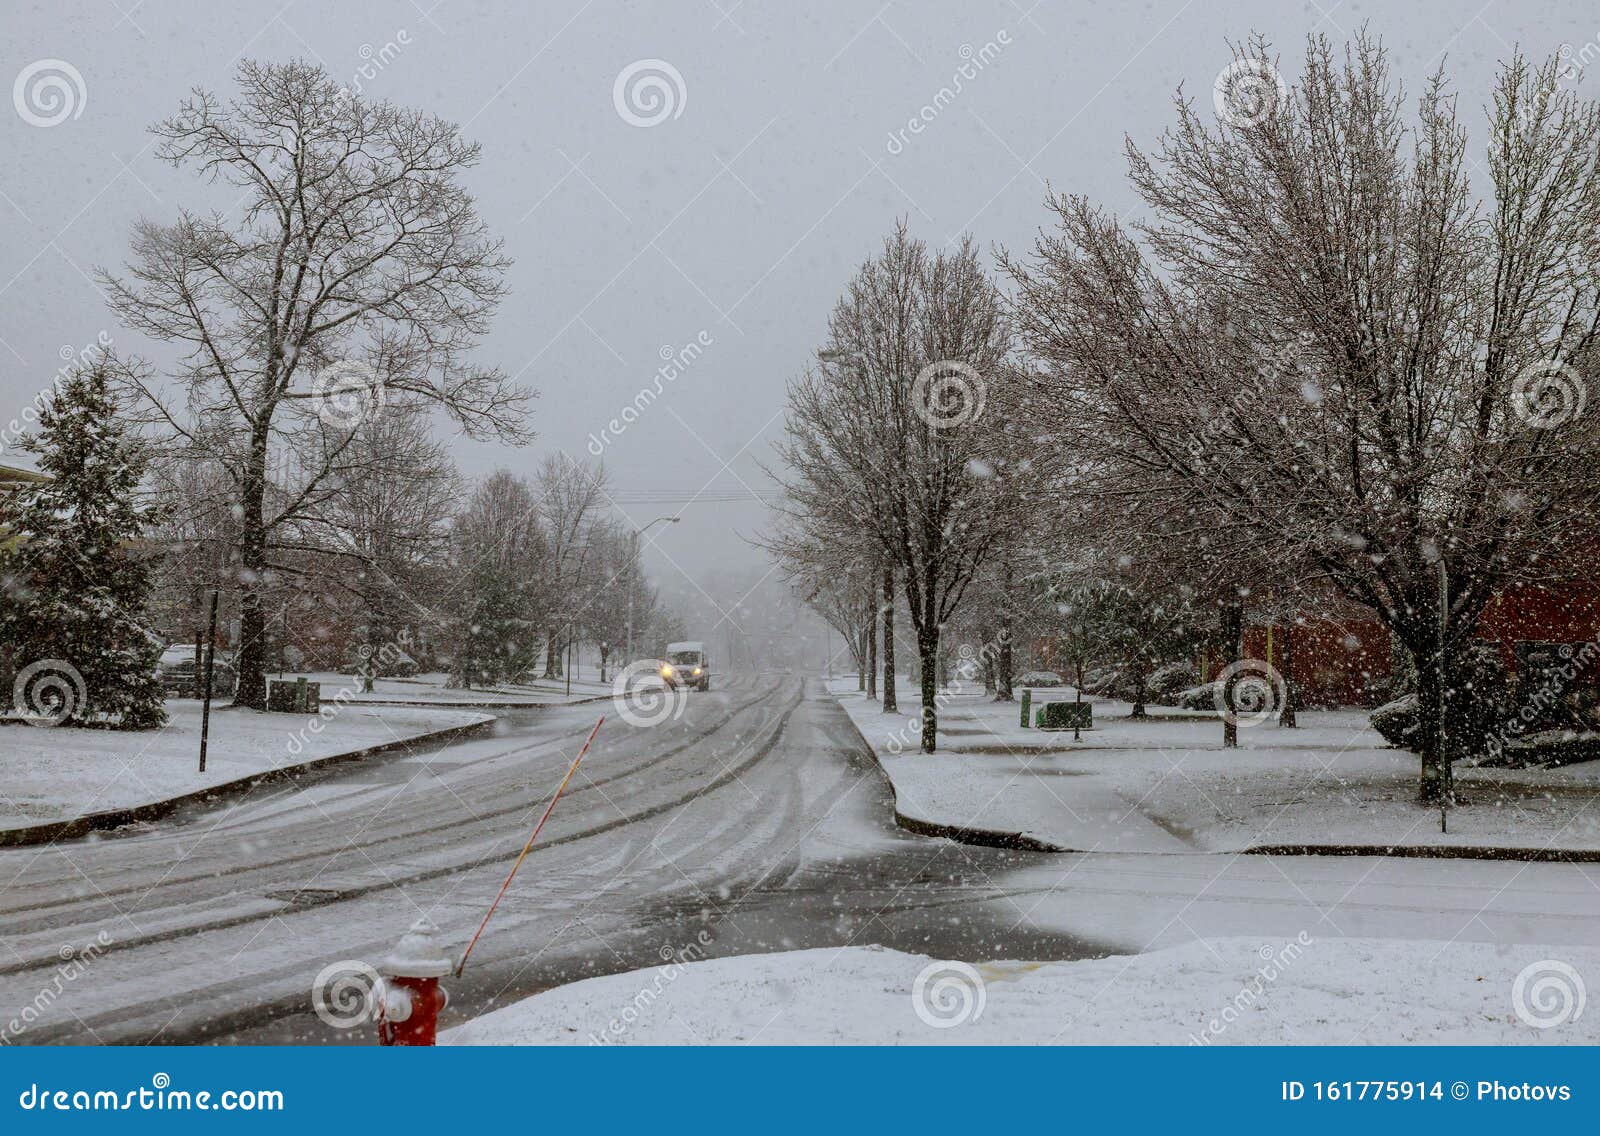 Winter Landscape Street of a Small Town Snow Covered Pavement Canada ...